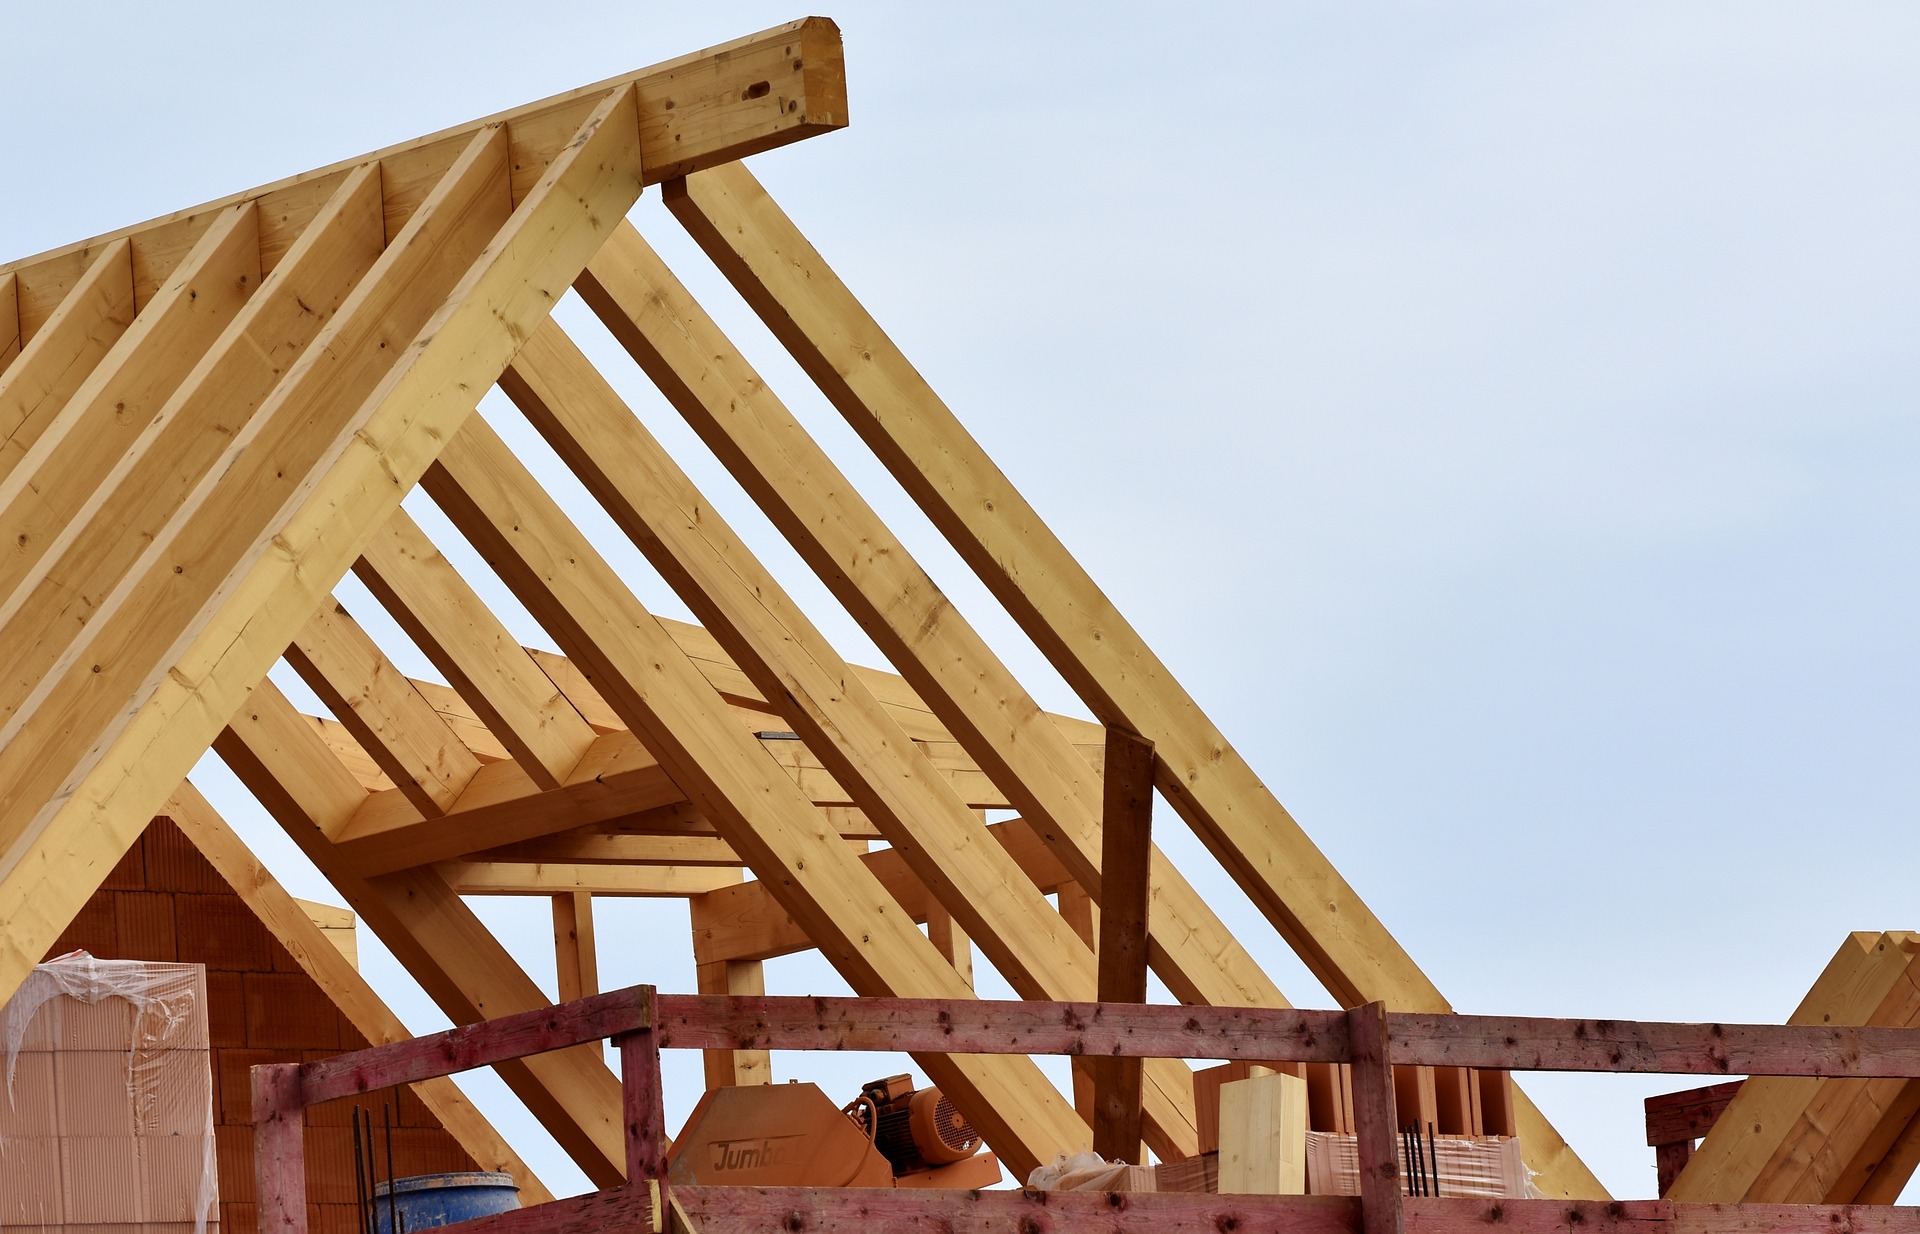 Latest Housing Data Points to More Gradual Growth for Homebuilders